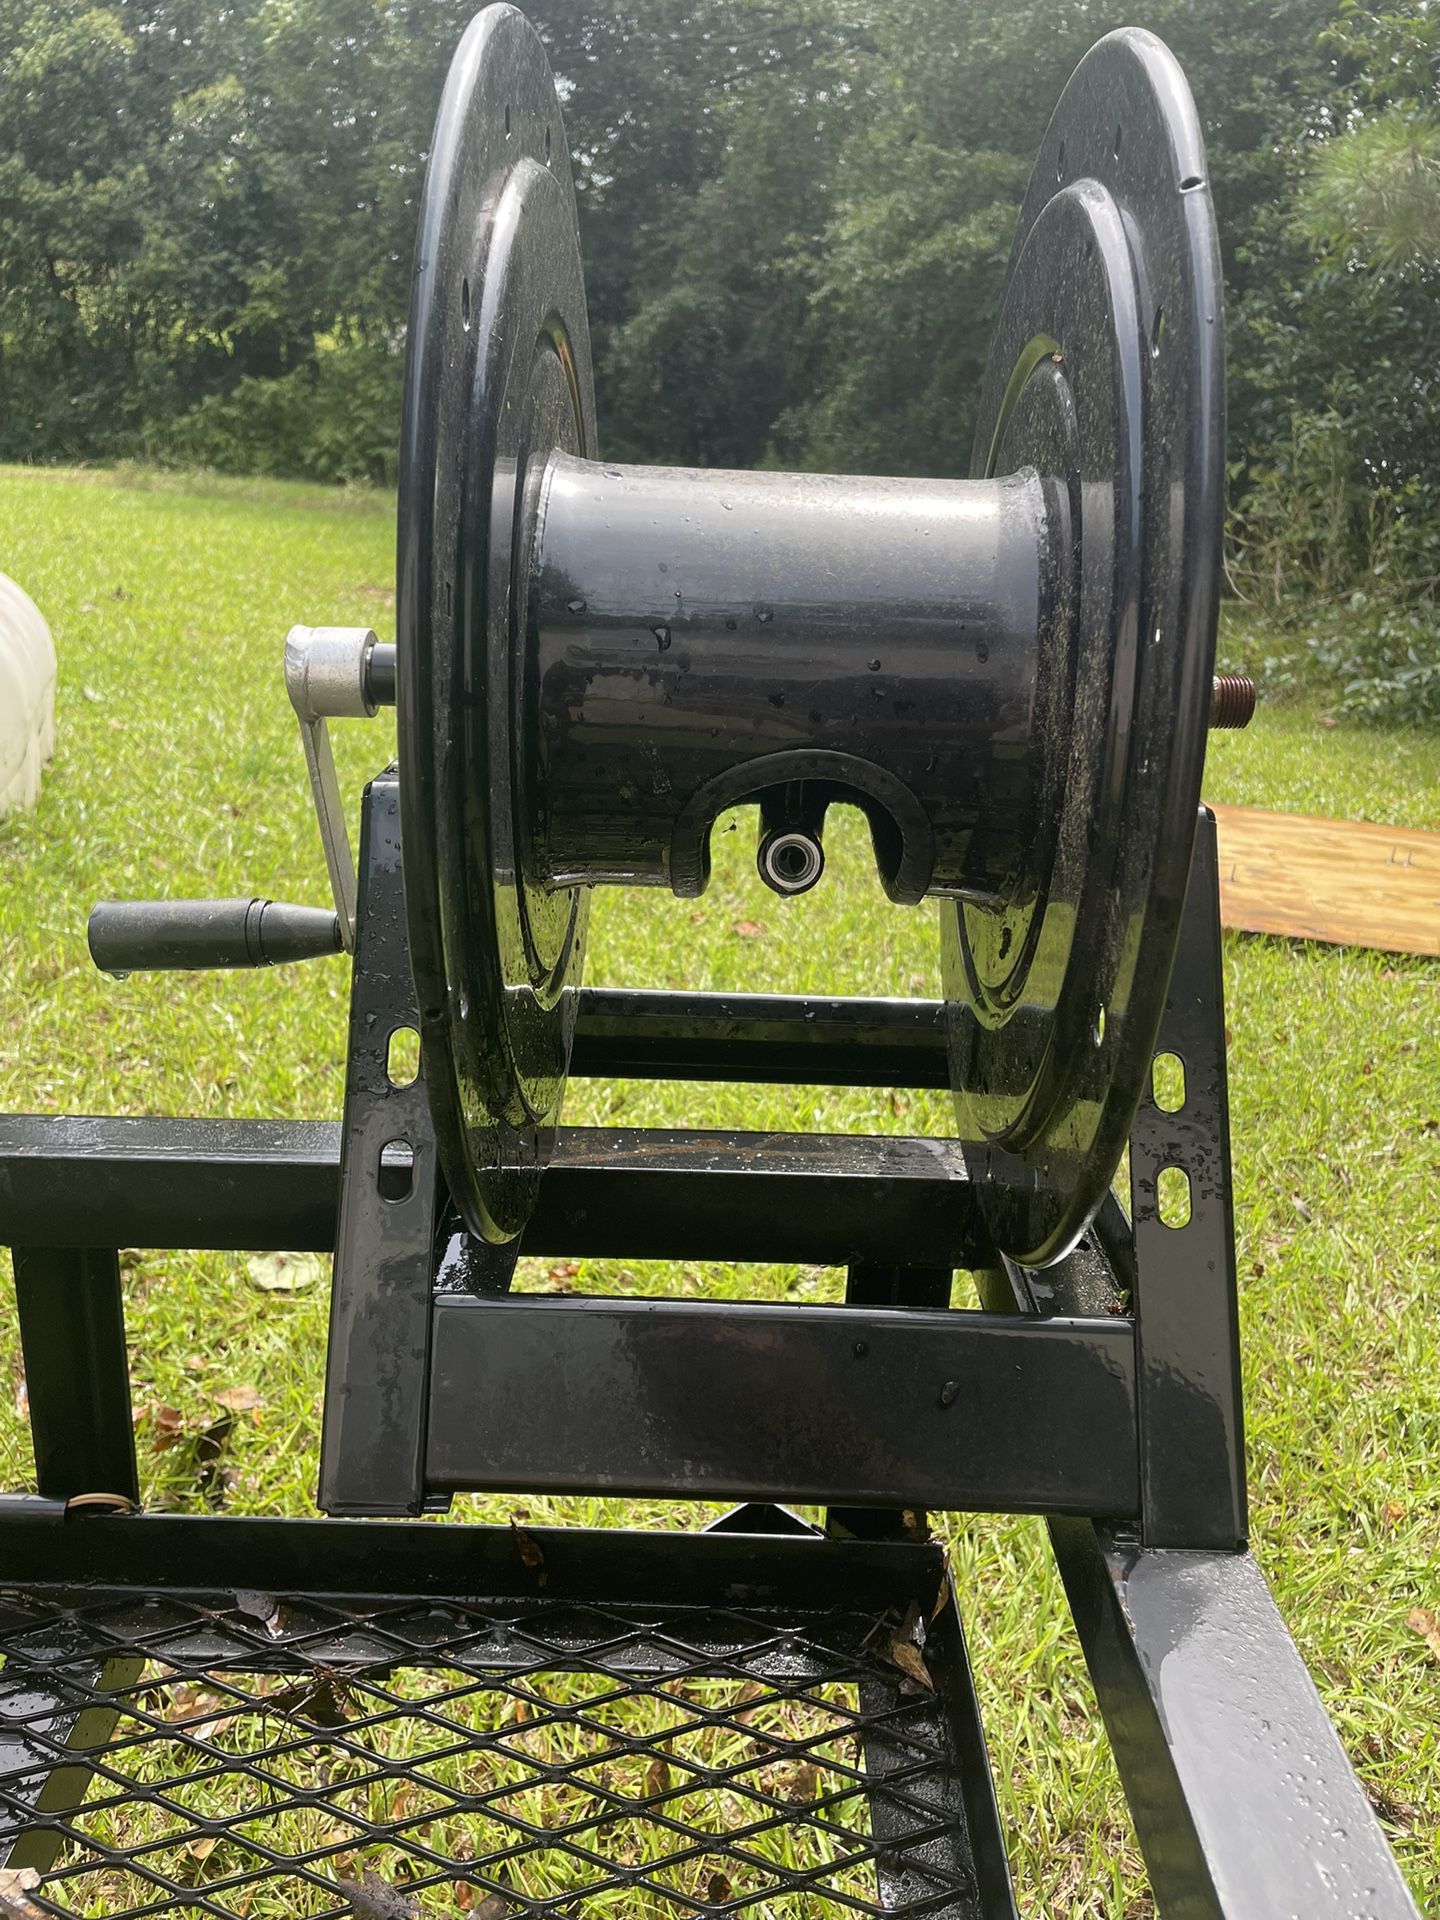 NorthStar Heavy Duty Hose Reel (5000 PSI) for Sale in Anderson, SC - OfferUp